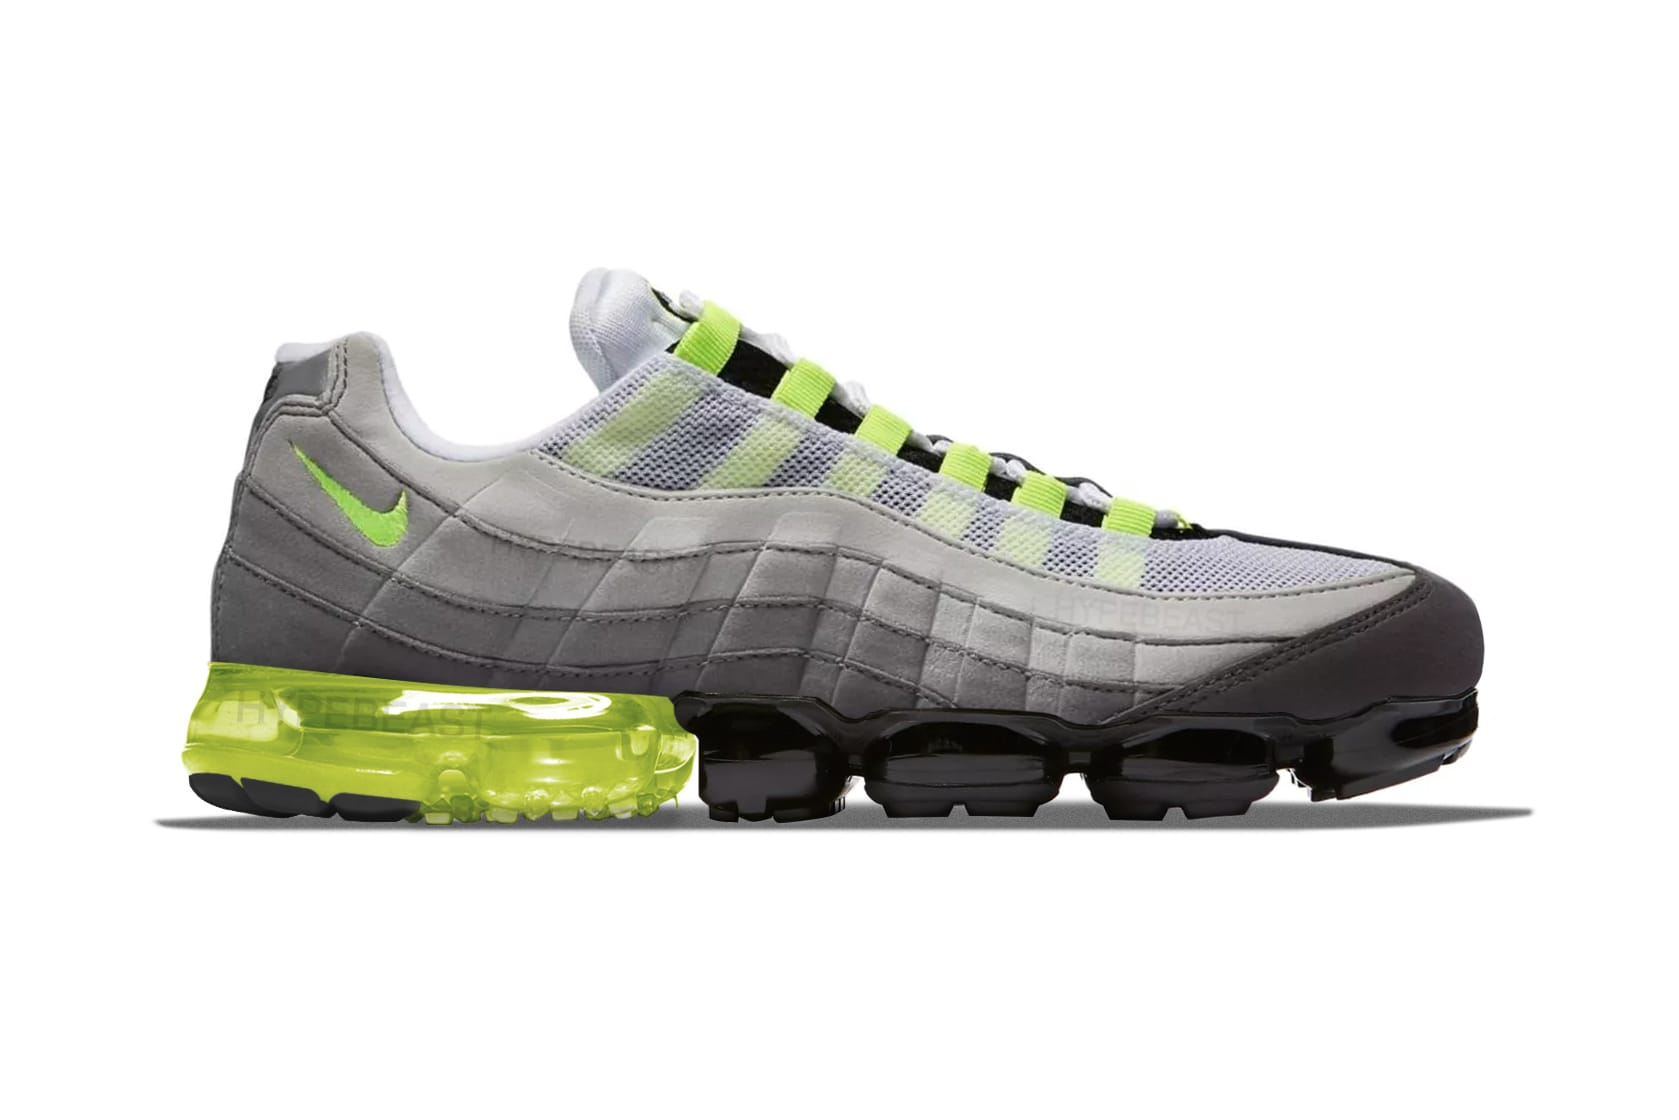 Nike Air Max 95 x VaporMax Hybrid Images Surface | HYPEBEAST